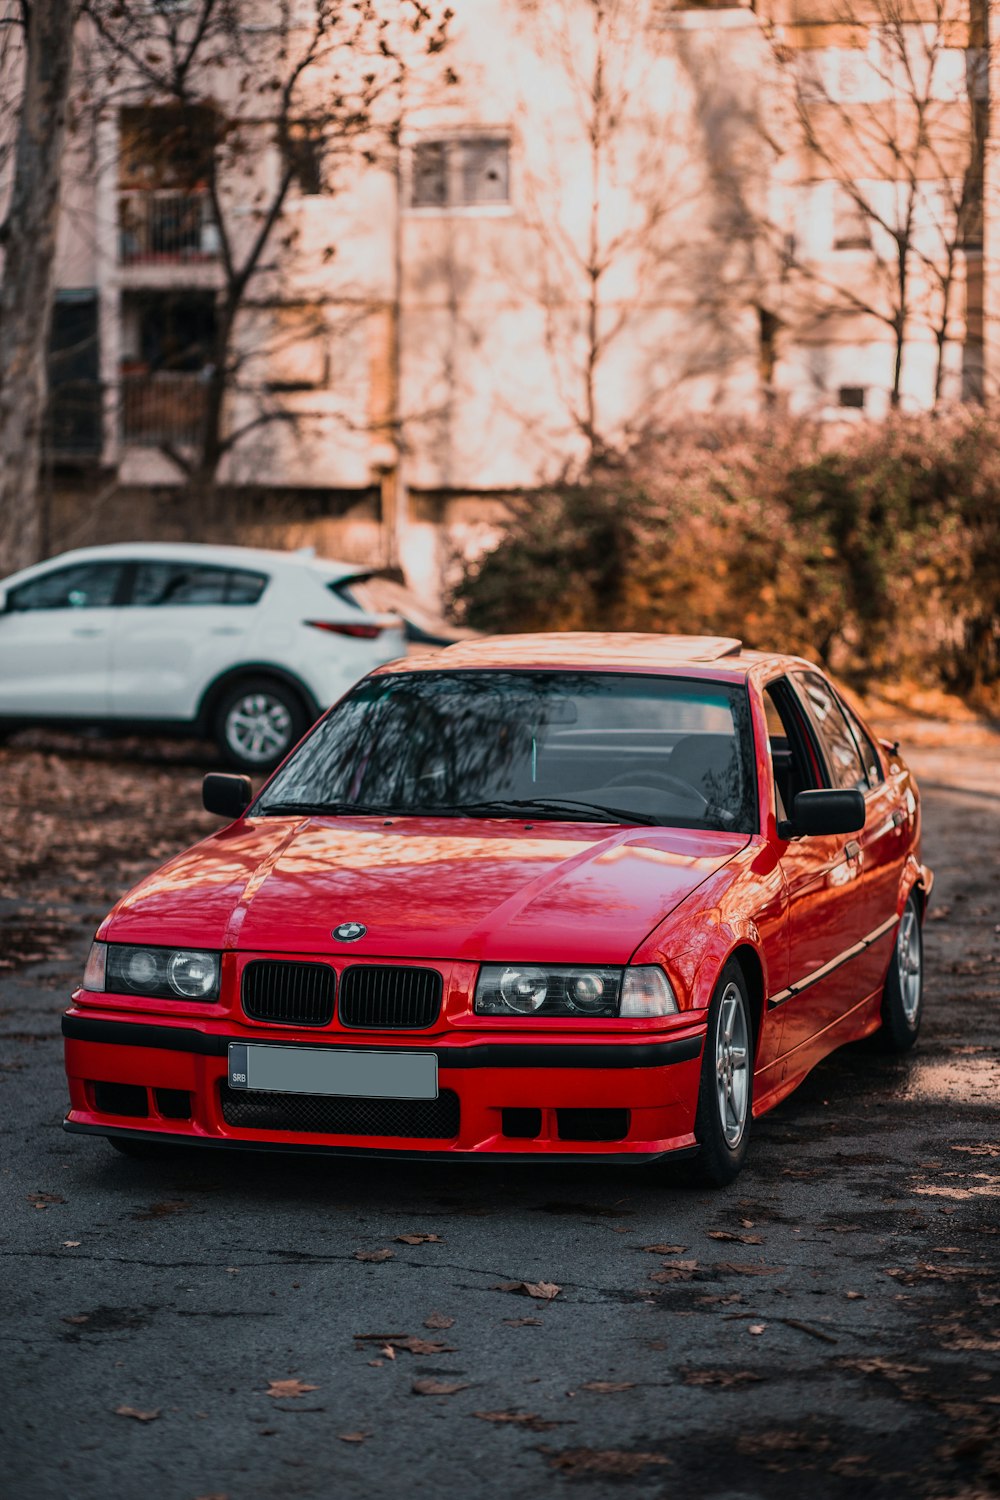 Bmw E36 Pictures | Download Free Images on Unsplash